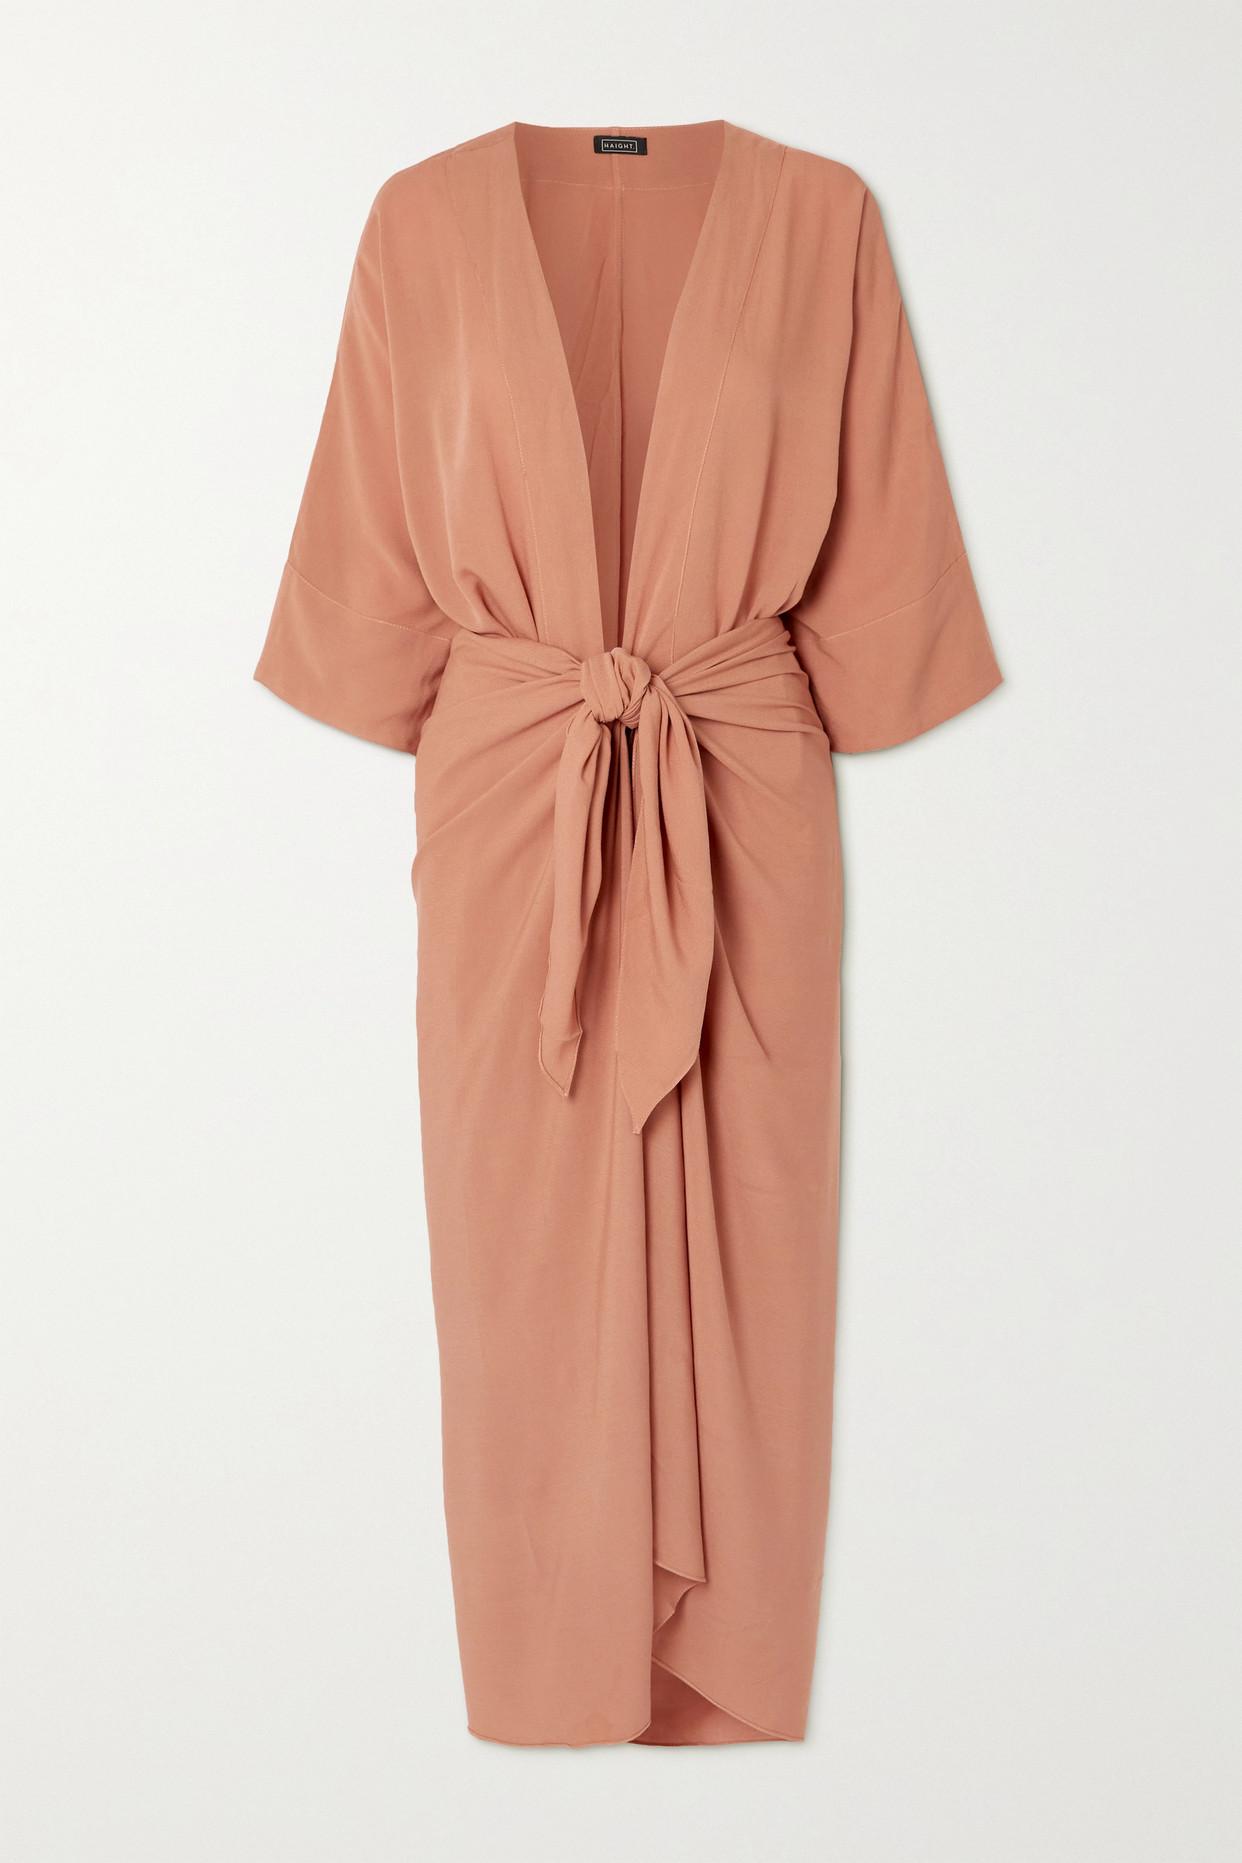 Haight Crepe Robe And Pareo Set in Pink | Lyst